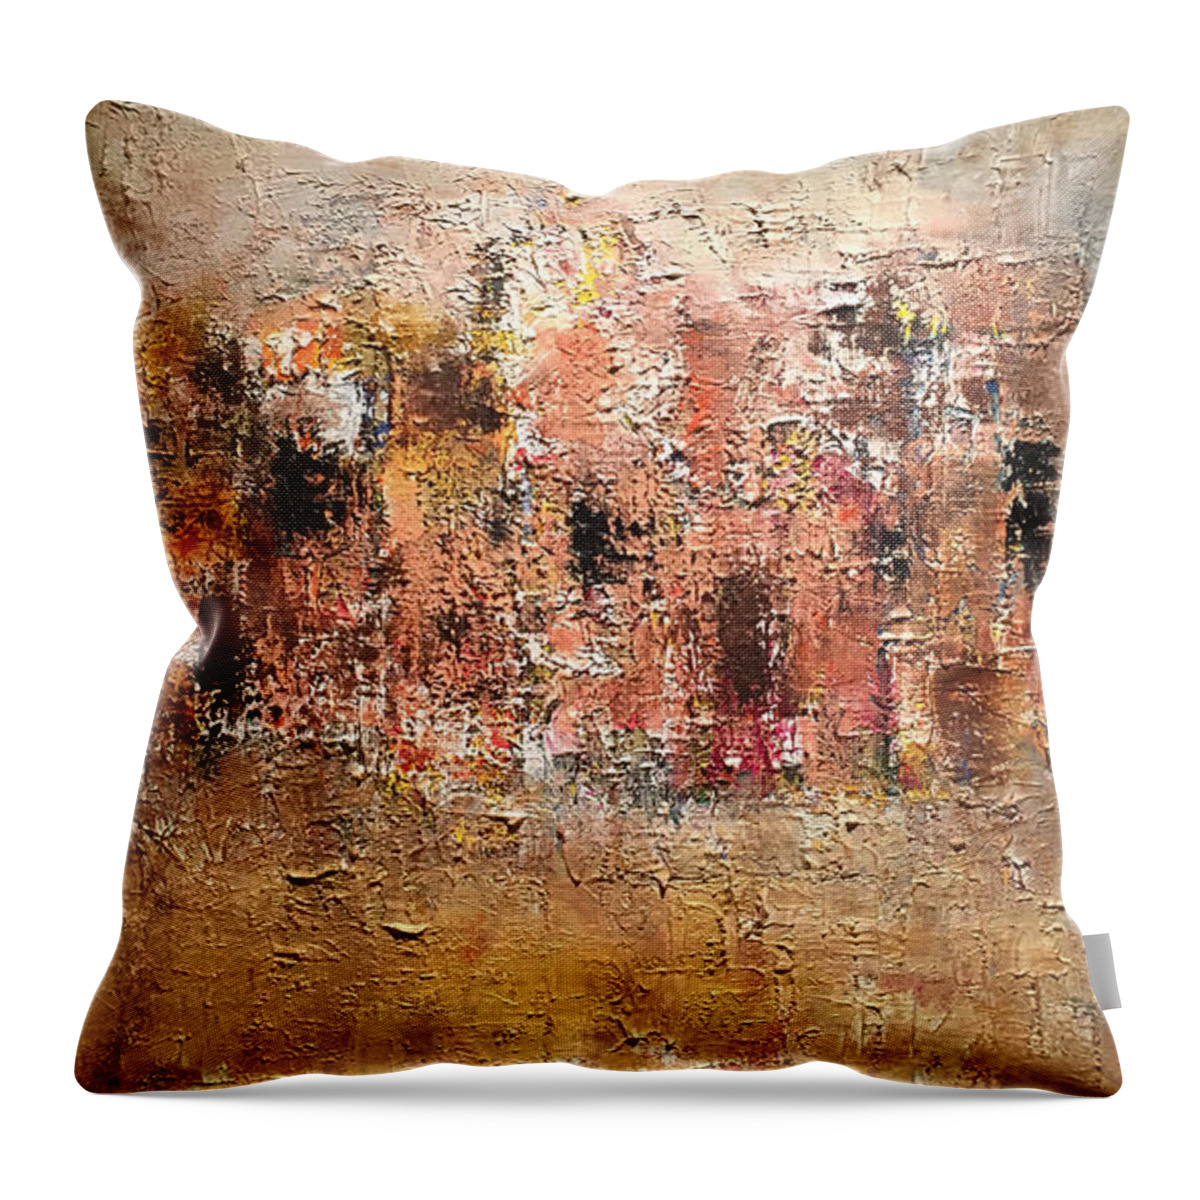 Urban Throw Pillow featuring the painting Birth of an Urbscape by Dennis Ellman